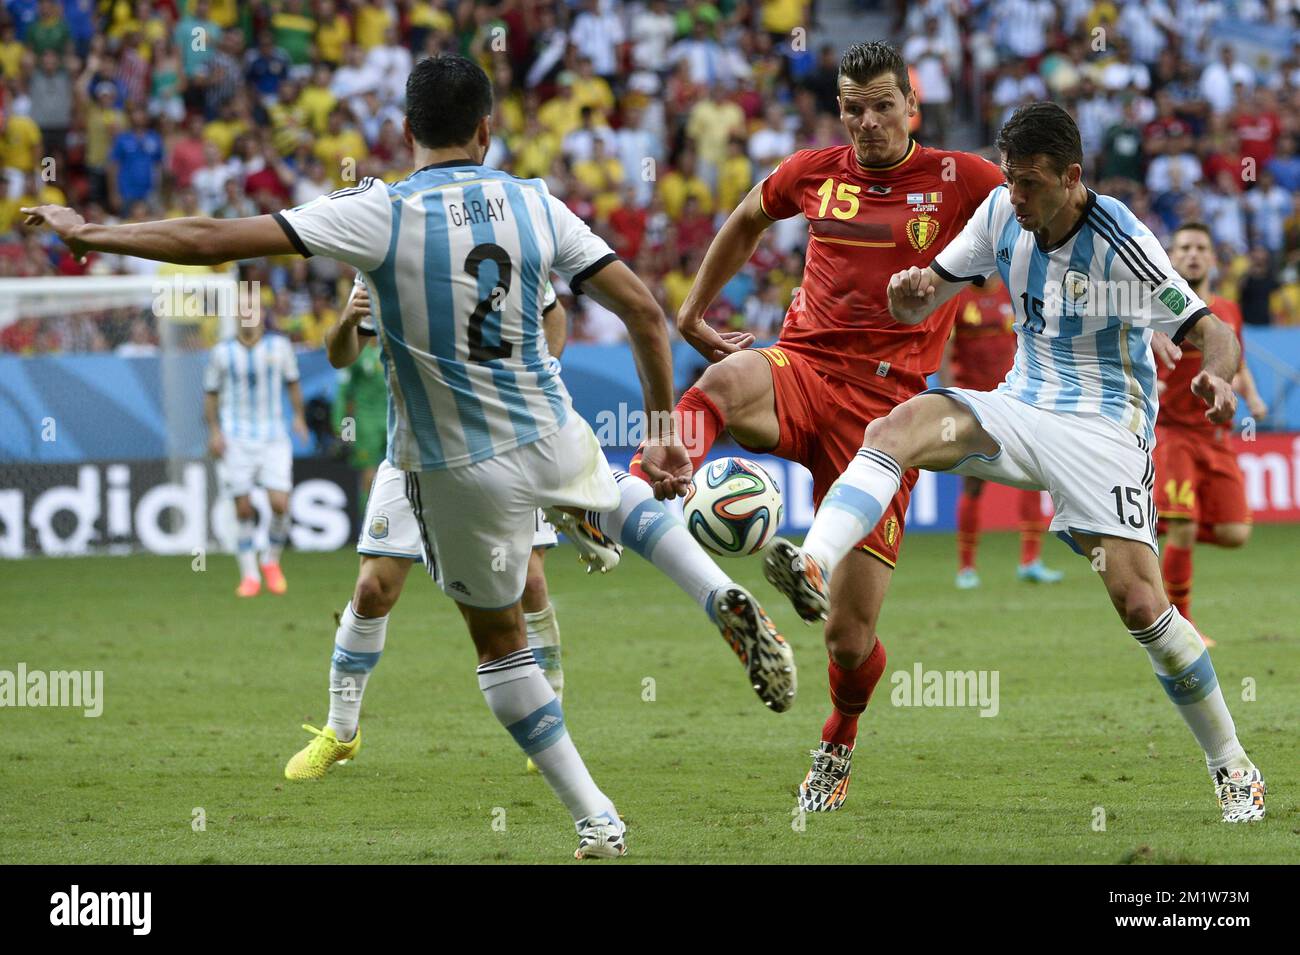 Argentina's Ezequiel Garay, Belgium's Daniel Van Buyten and Argentina's Martin Demichelis fight for the ball during the quarter final match between Belgian national soccer team Red Devils and Argentina, in Estadio Nacional Mane Garrincha, in Brasilia, Brazil, during the 2014 FIFA World Cup, Saturday 05 July 2014.  Stock Photo